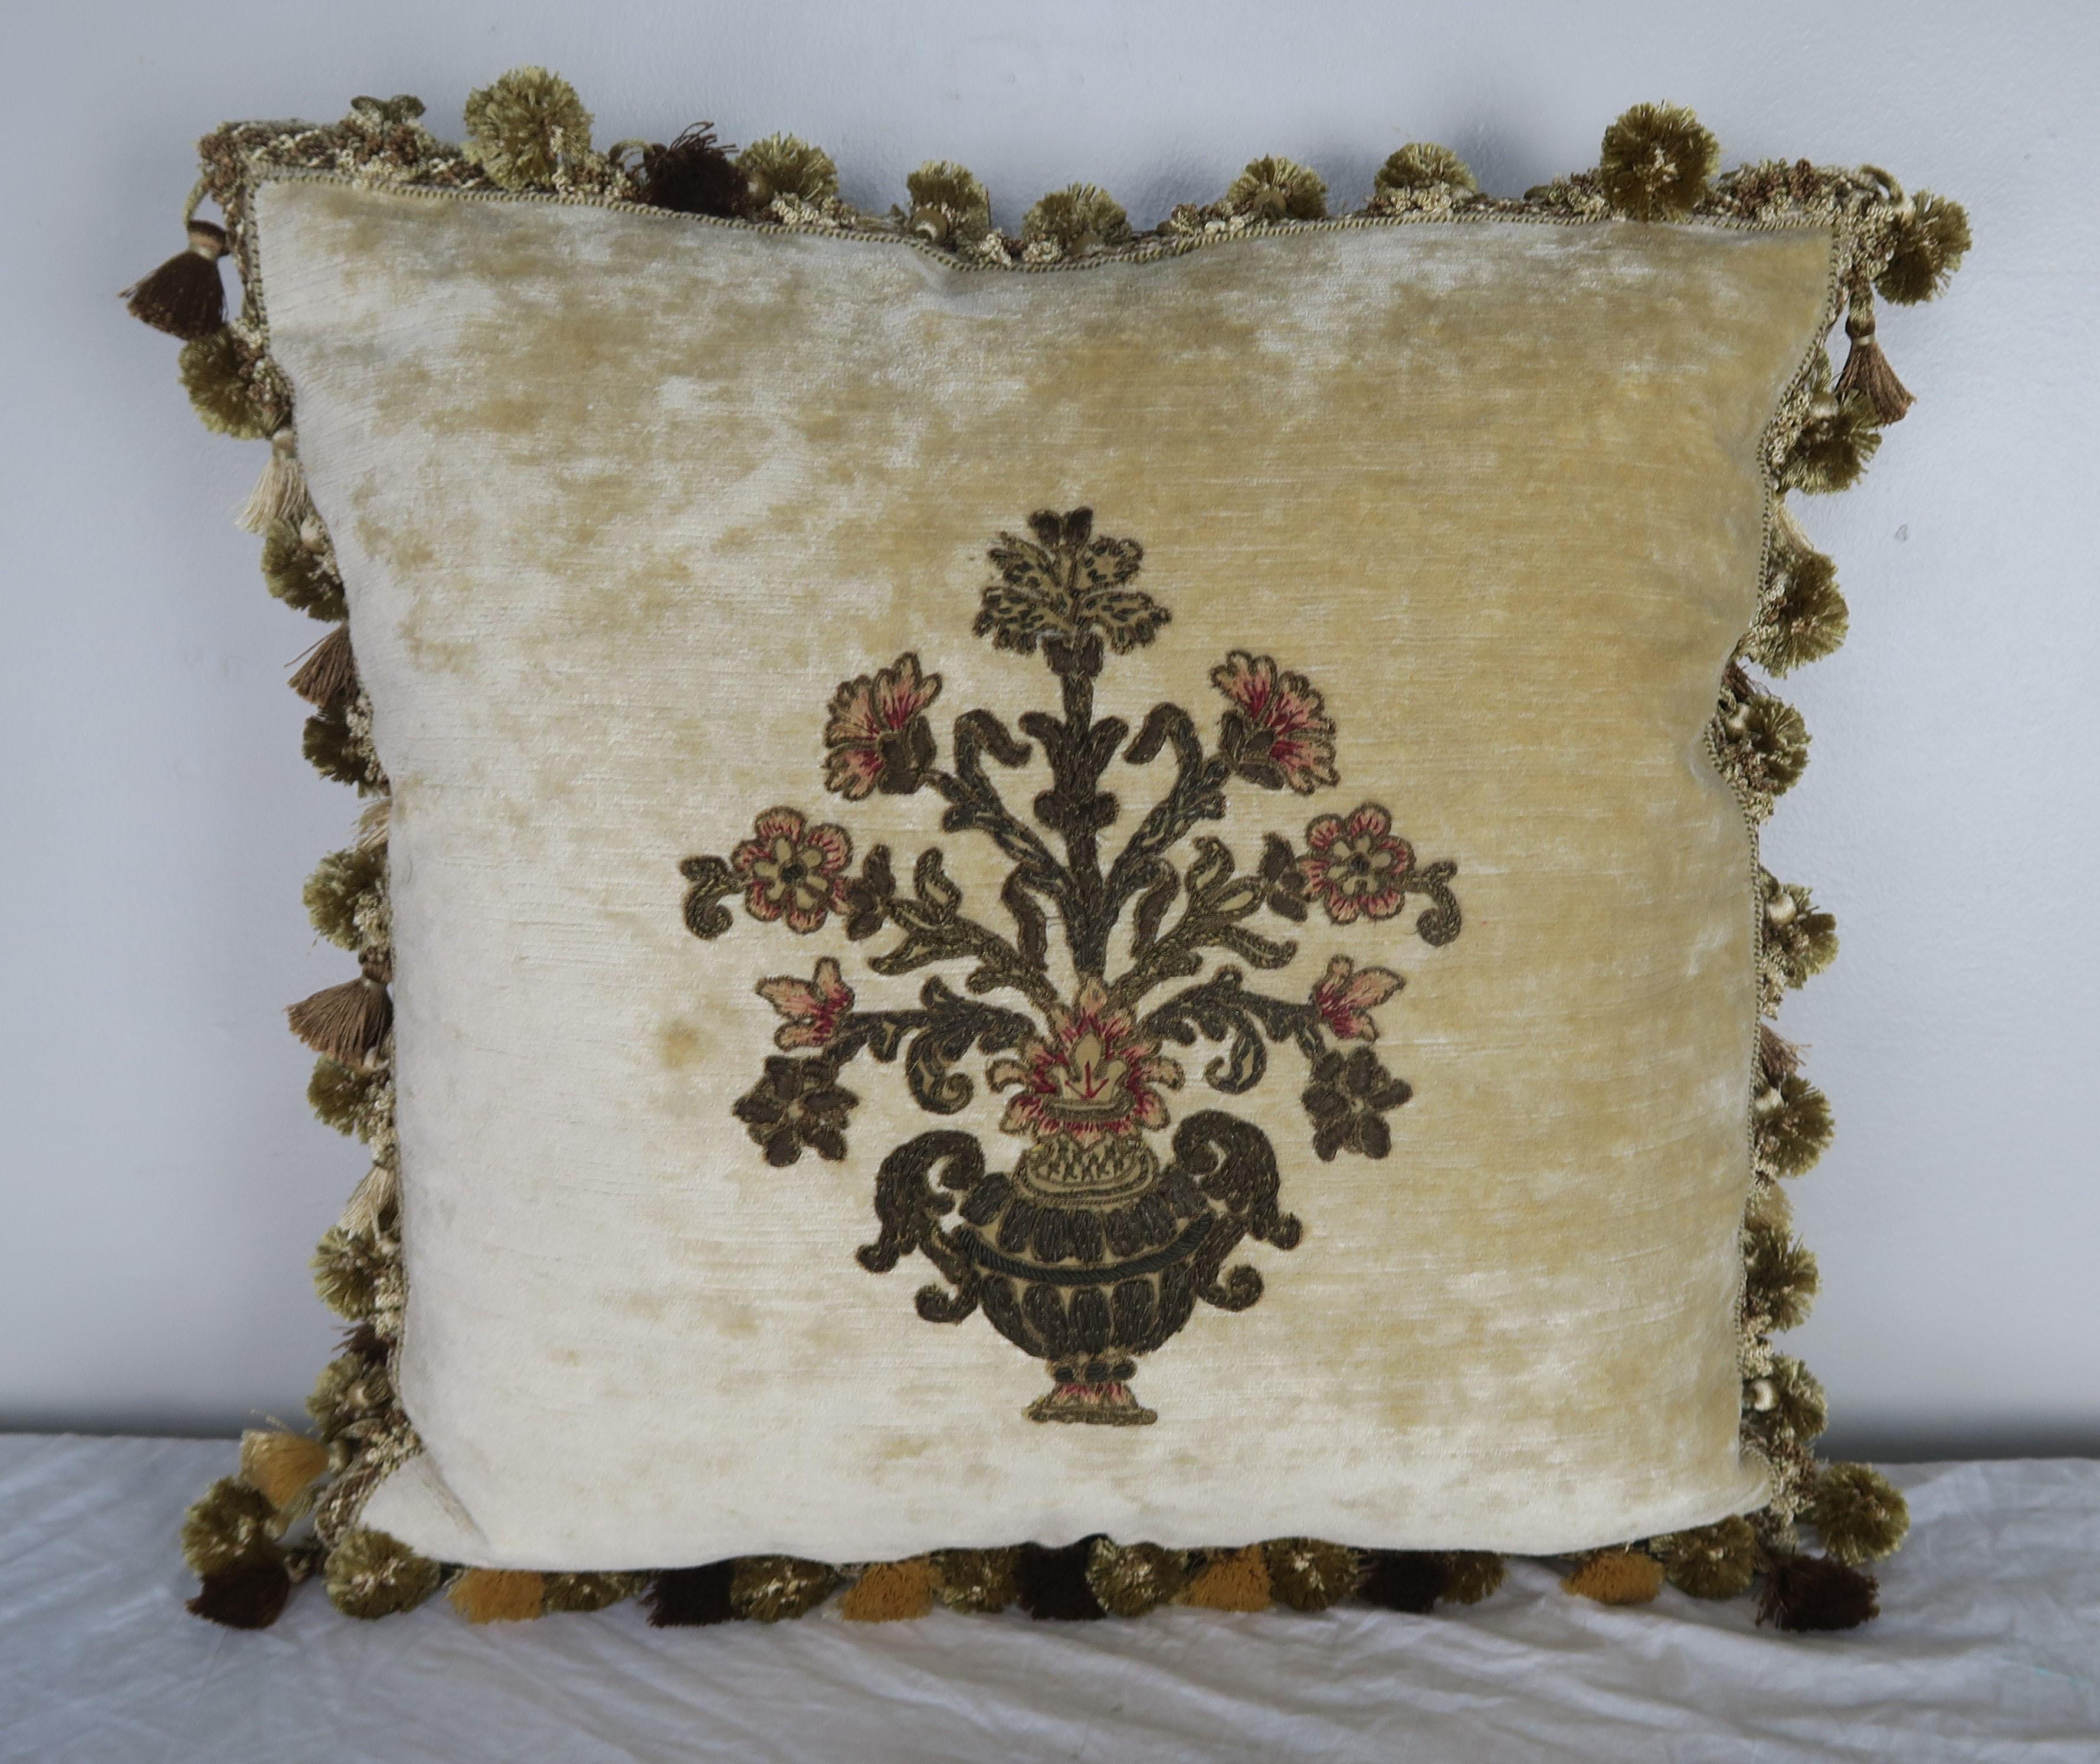 Pair of custom pillows designed by Melissa Levinson. The pillows are made with 19th century French metallic and chenille hand embroidered textiles appliqued to cream colored linen velvet. The textiles depict an urn overflowing with flowers. A multi